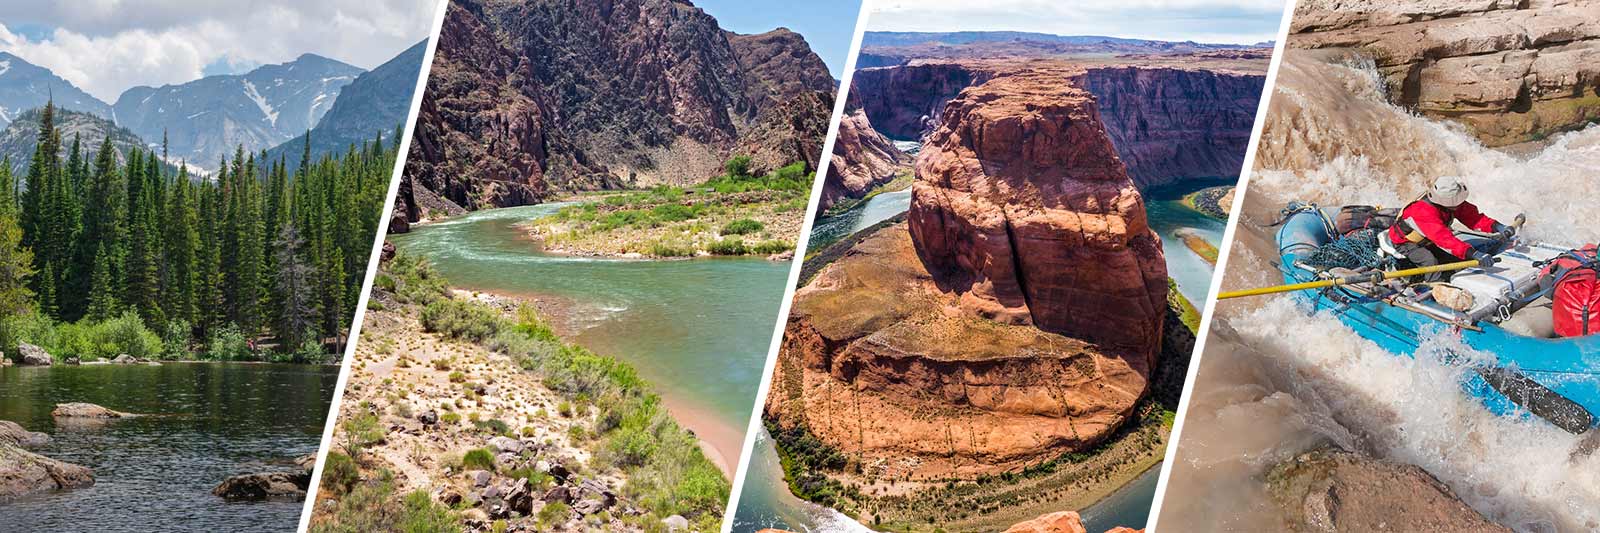 The Colorado River takes many forms during its 1450-mile journey across the West, from a meandering alpine stream to raging rapids.